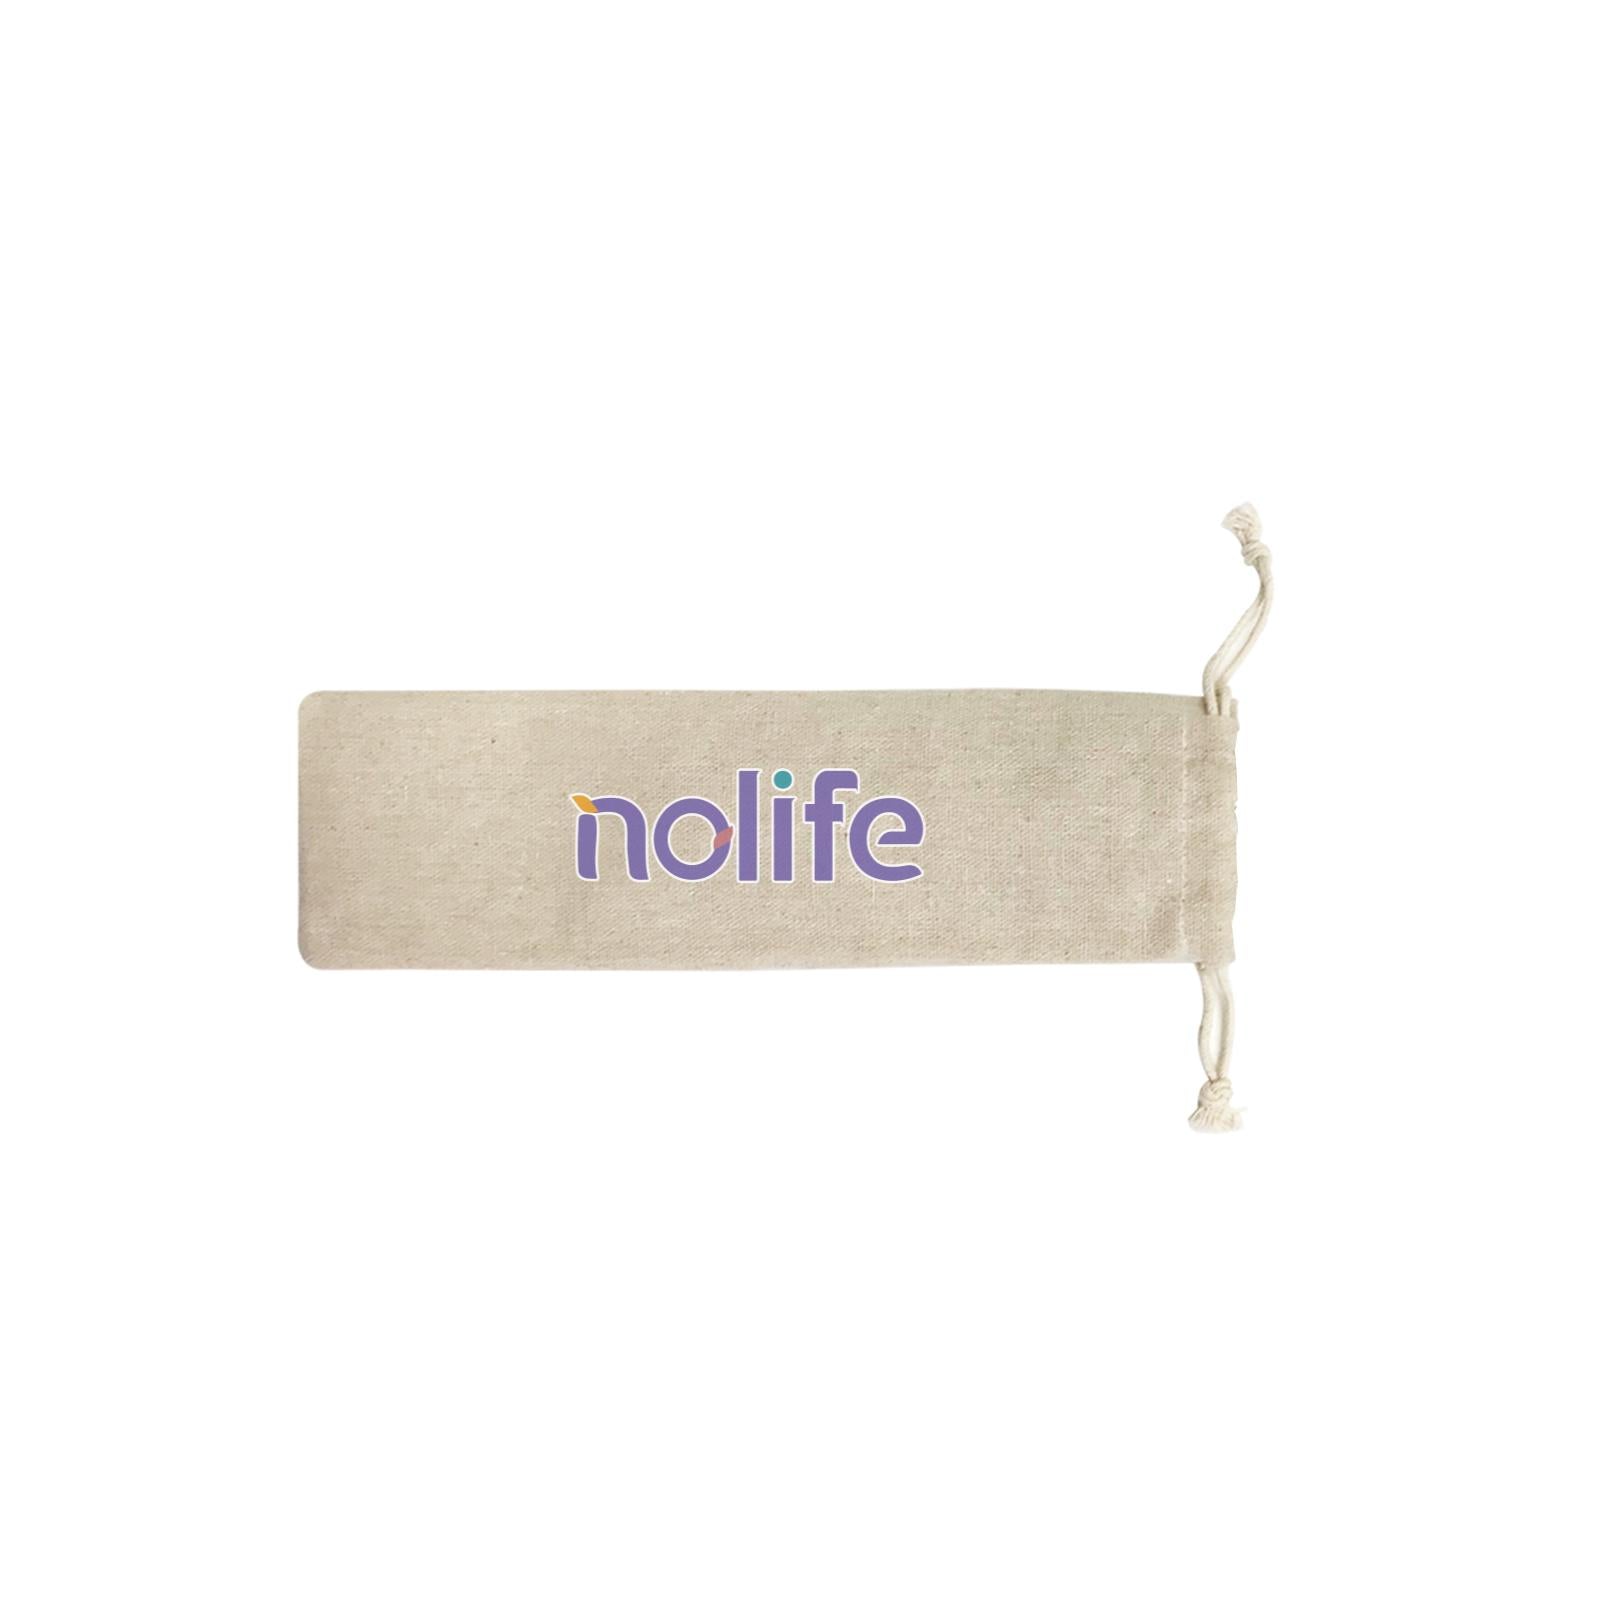 Slang Statement Nolife SB Straw Pouch (No Straws included)